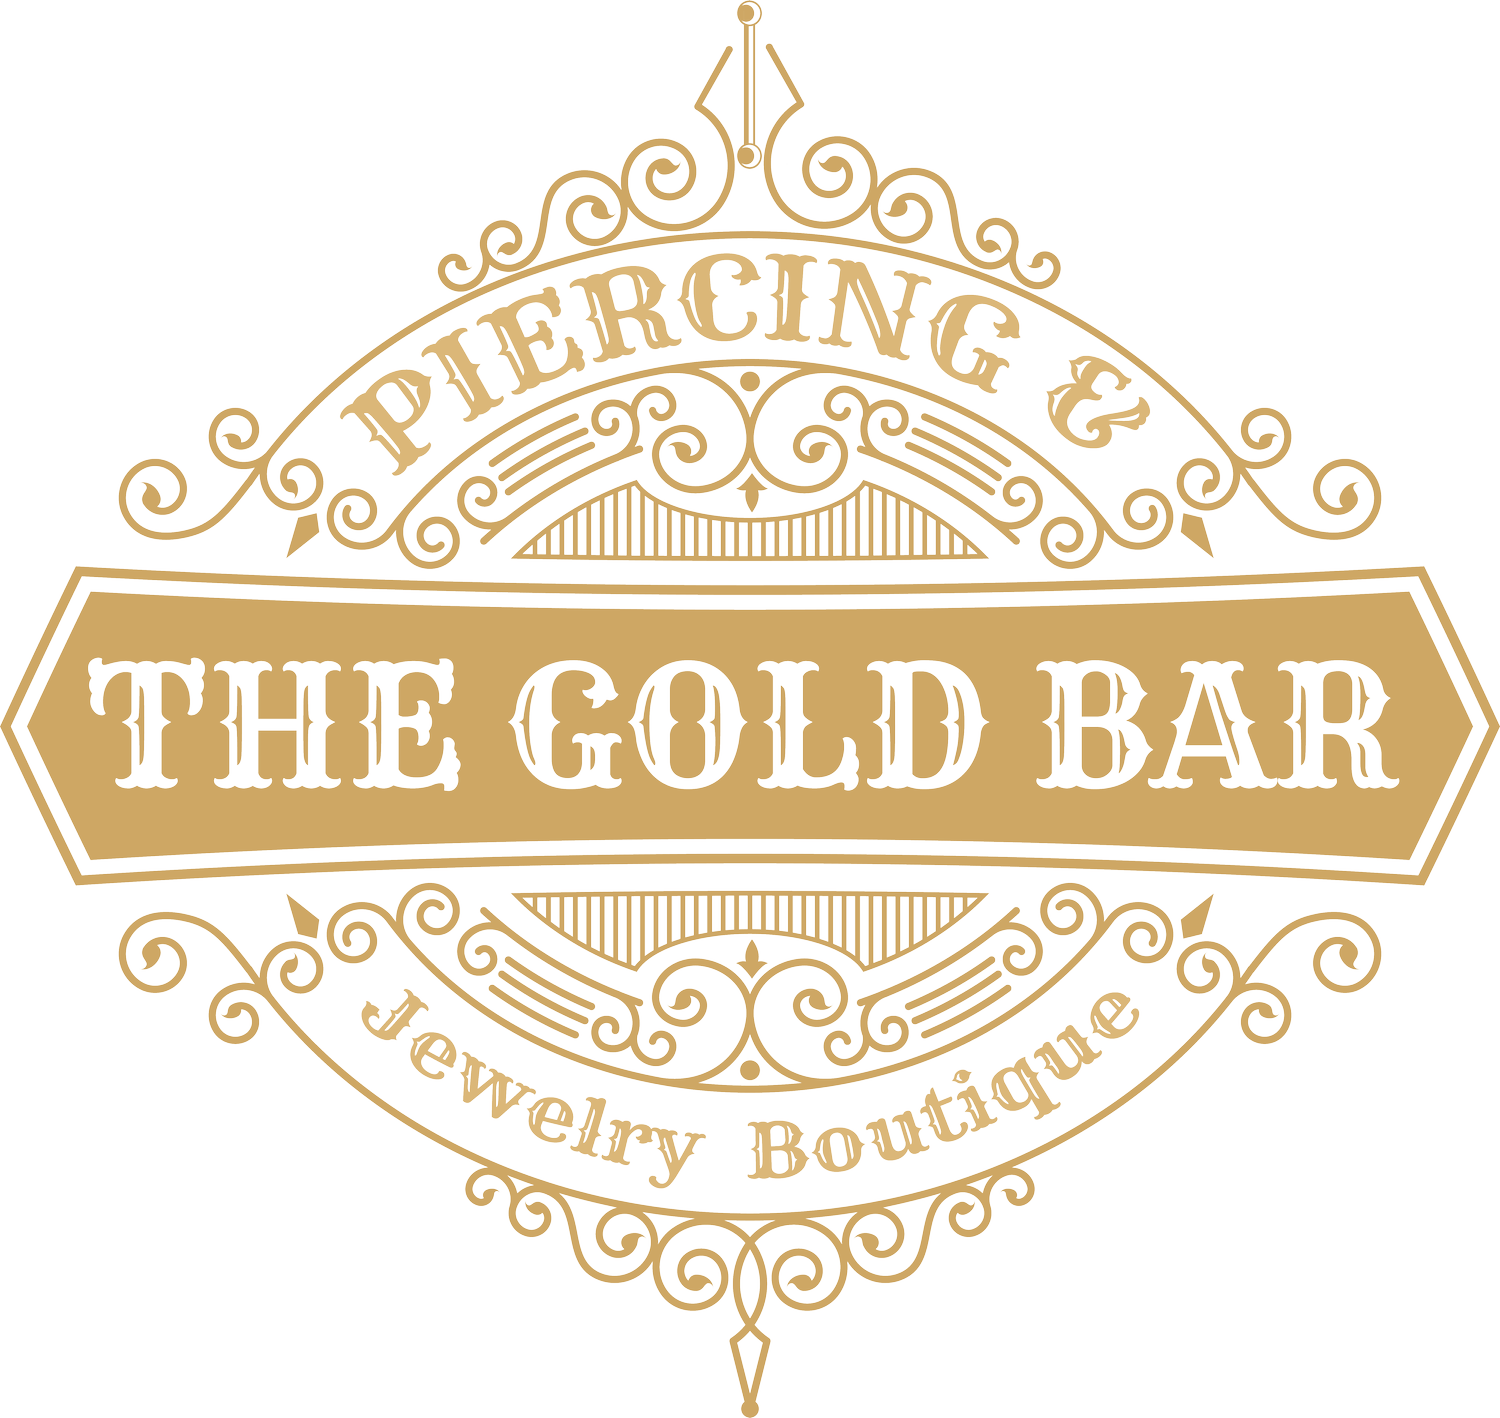 The Gold Bar Piercing and Jewelry Boutique